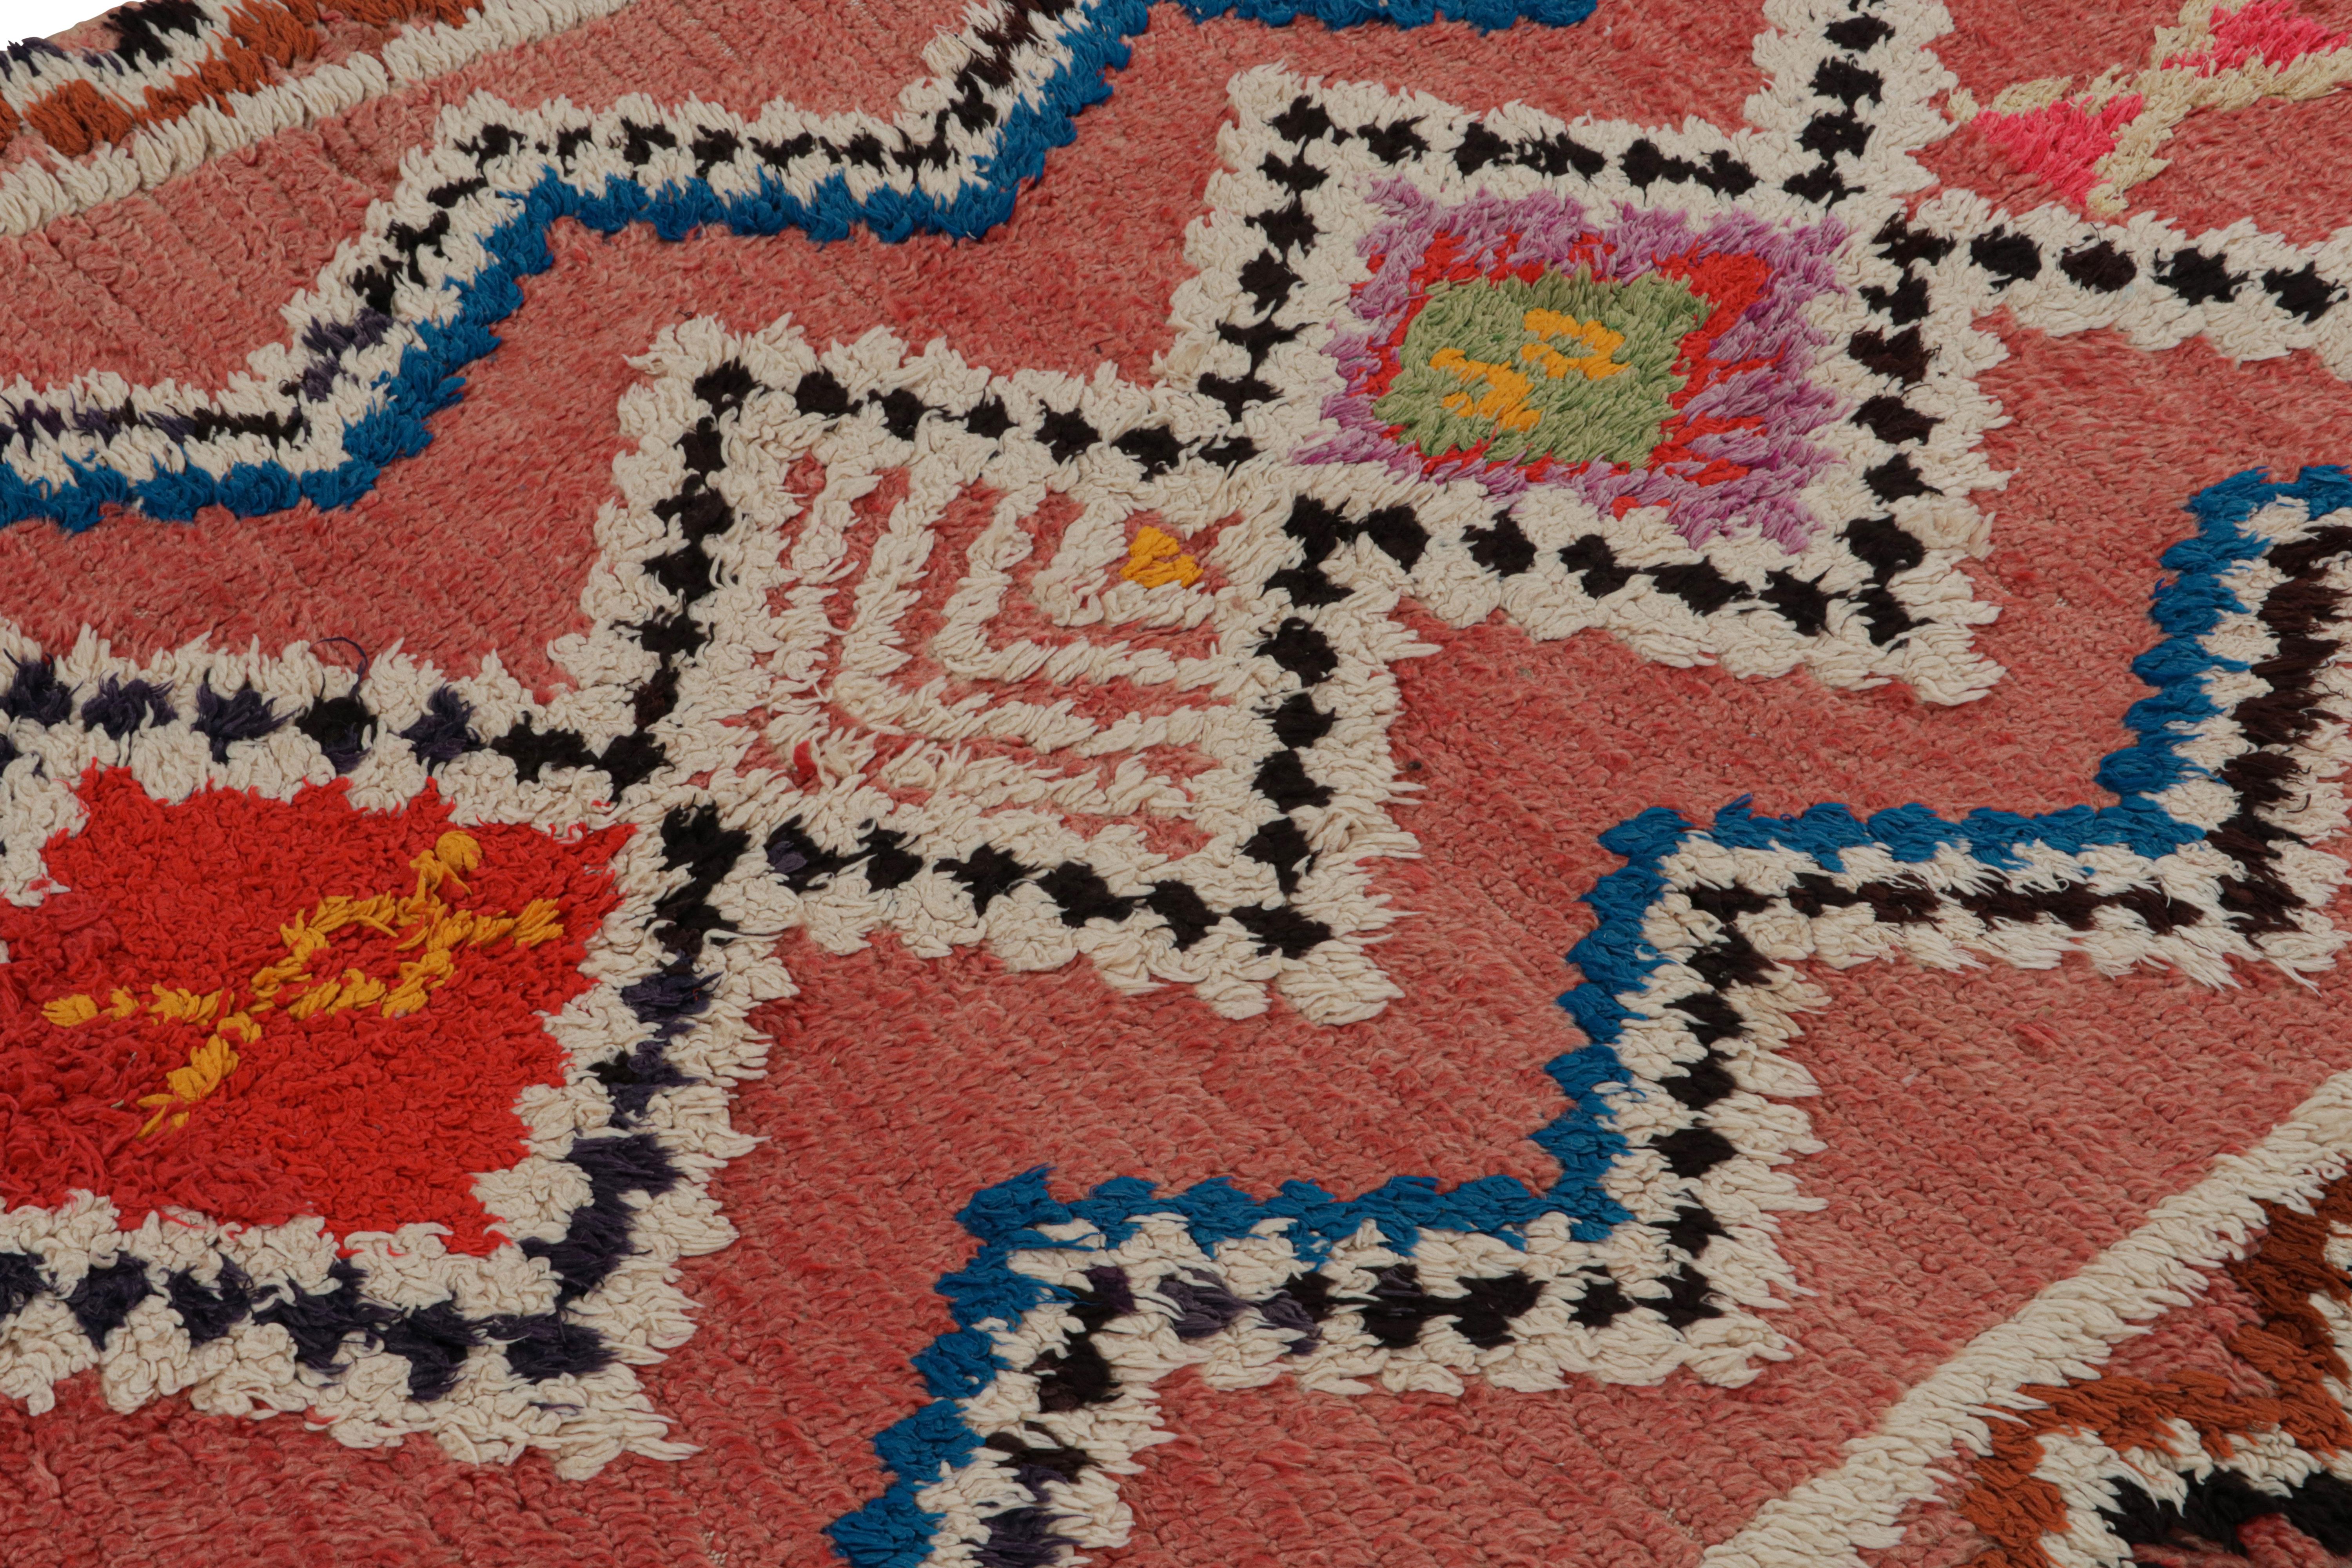 Vintage Moroccan Rug in Salmon Red with Geometric Patterns, from Rug & Kilim  In Good Condition For Sale In Long Island City, NY